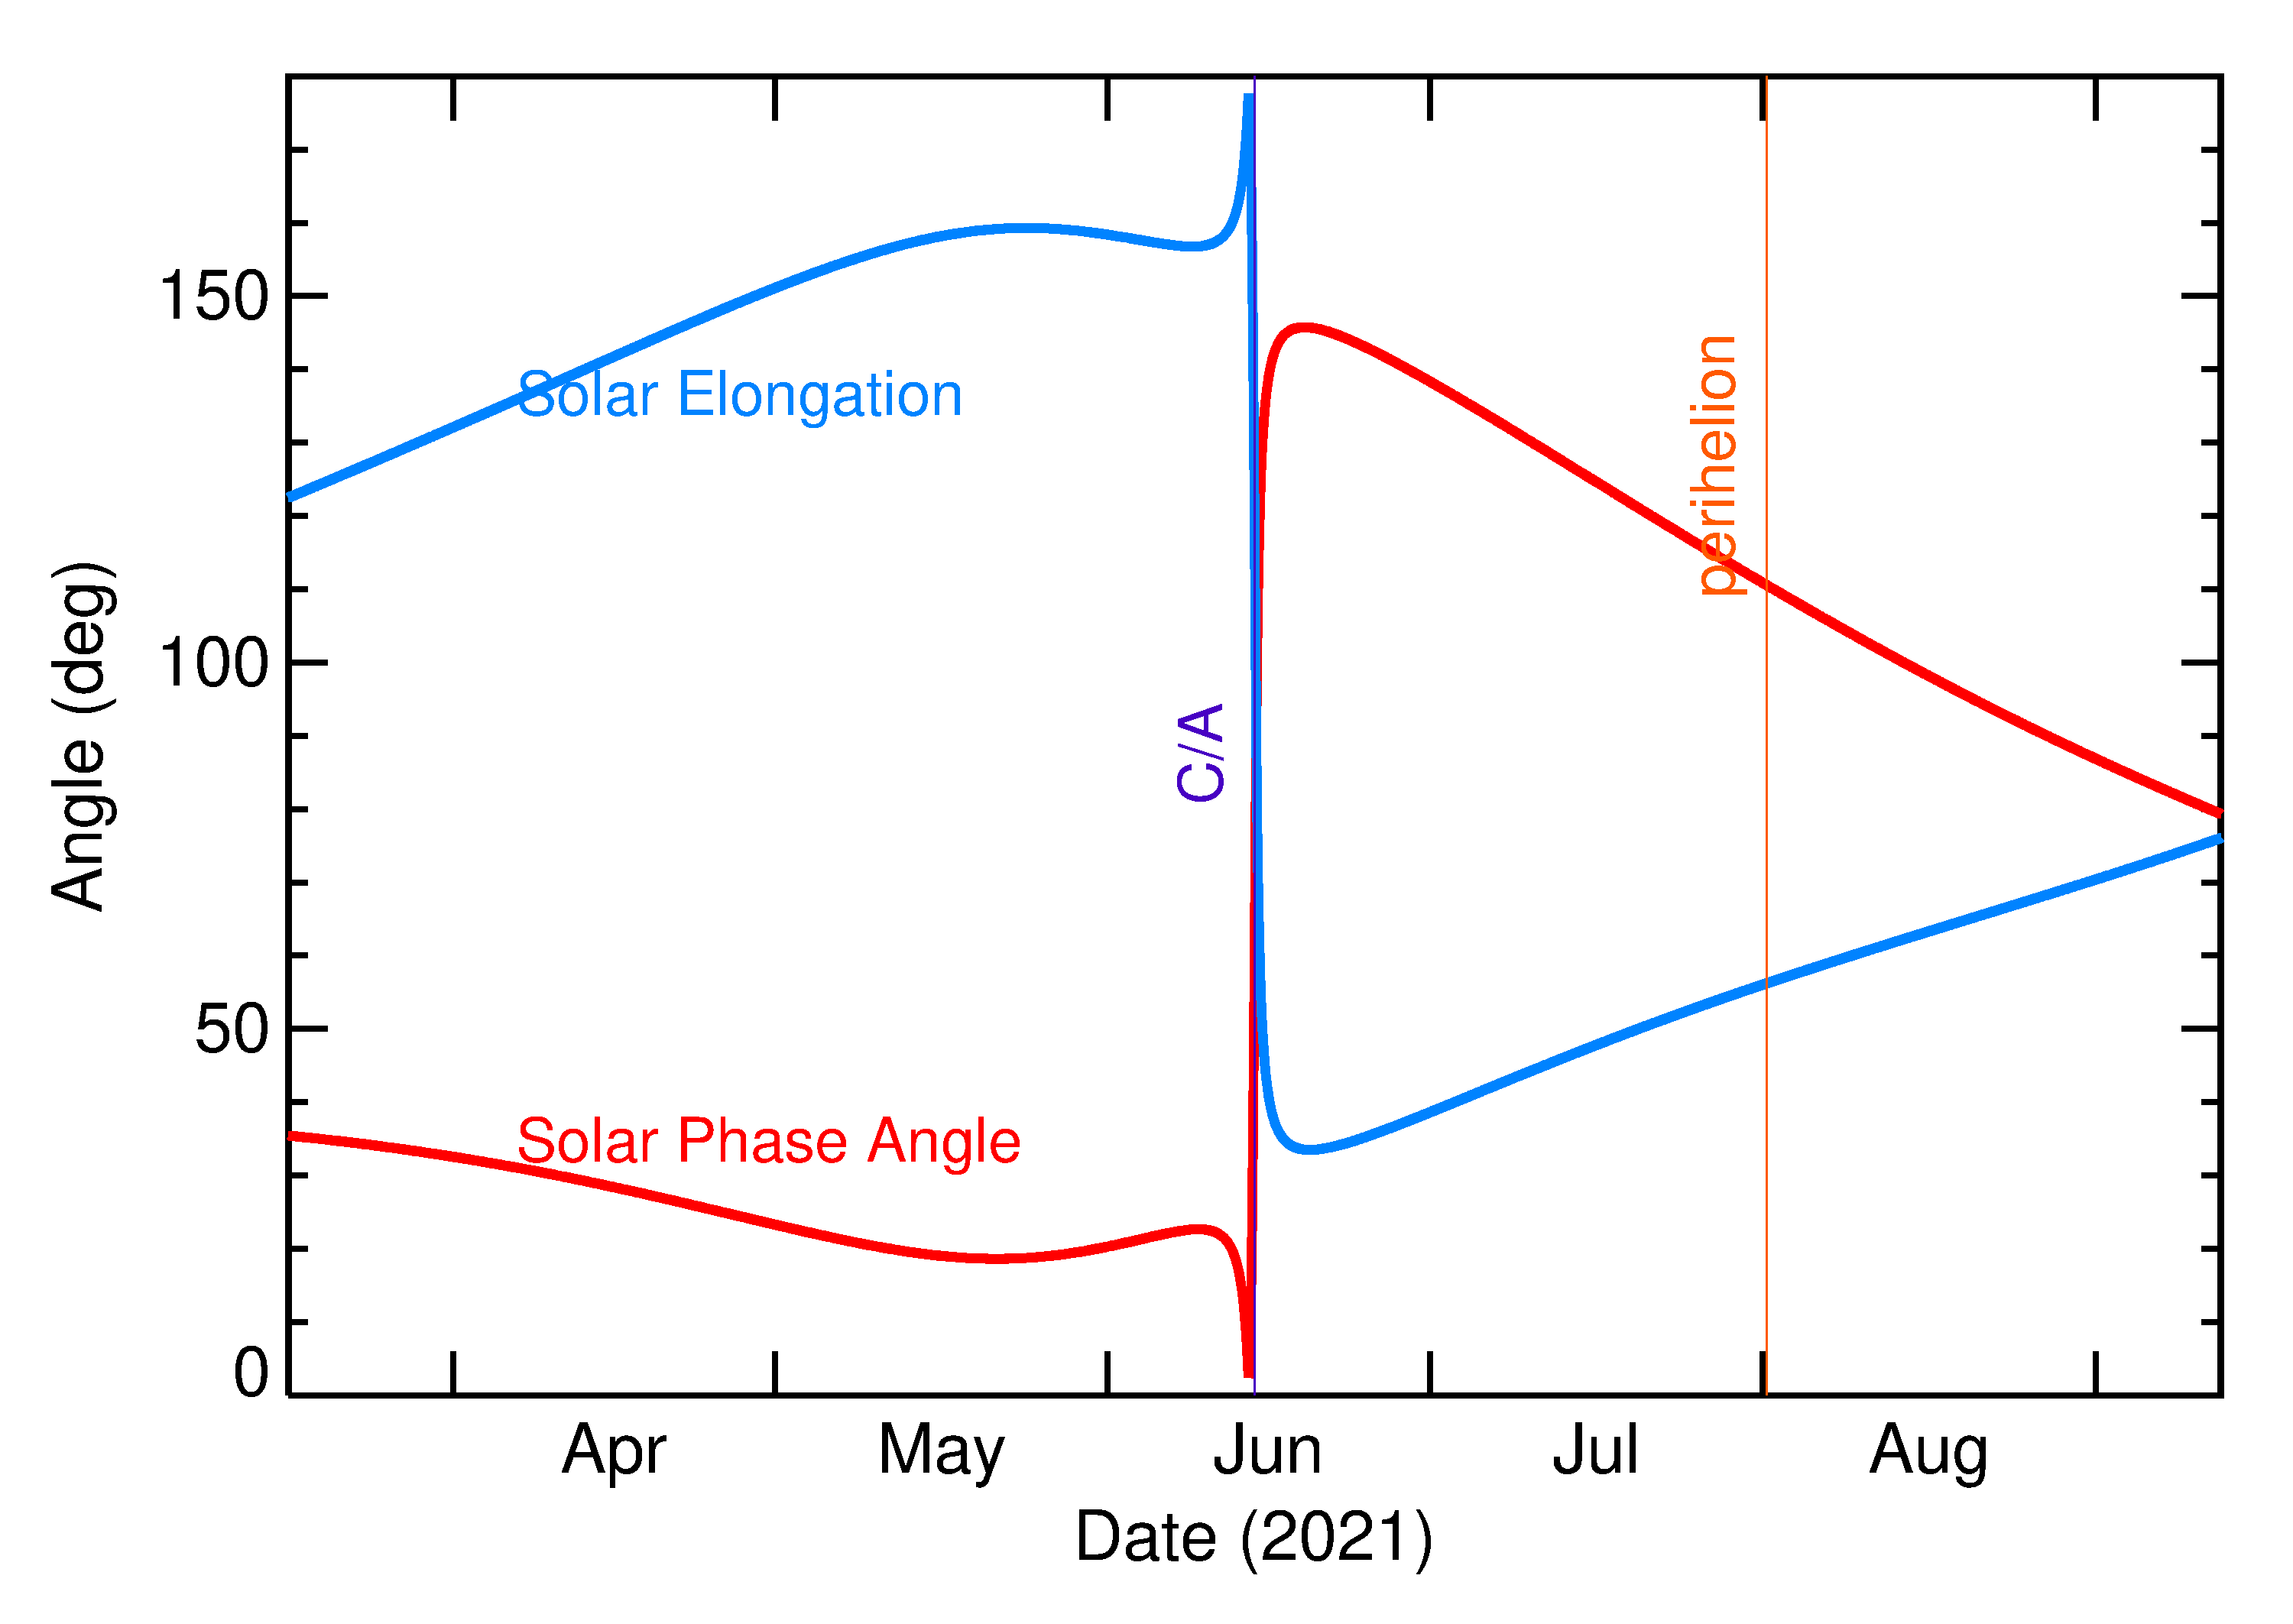 Solar Elongation and Solar Phase Angle of 2021 LO2 in the months around closest approach